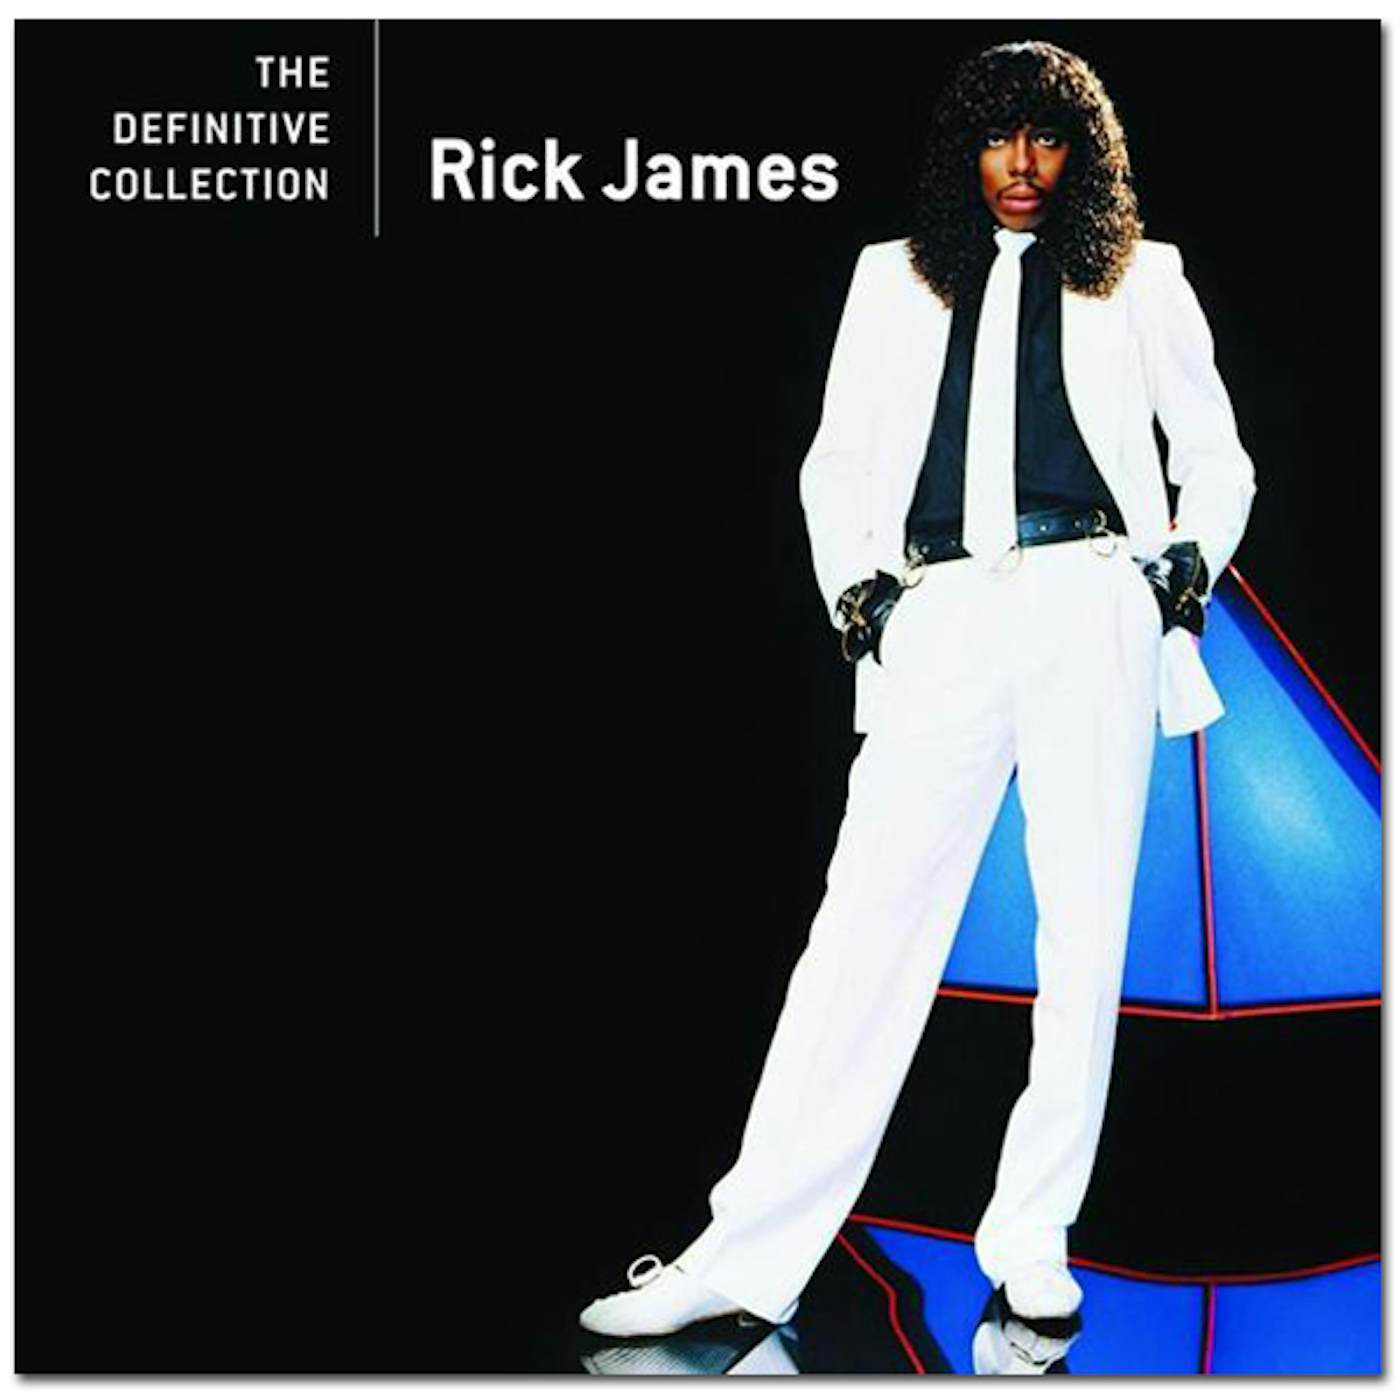 Rick James - The Definitive Collection CD